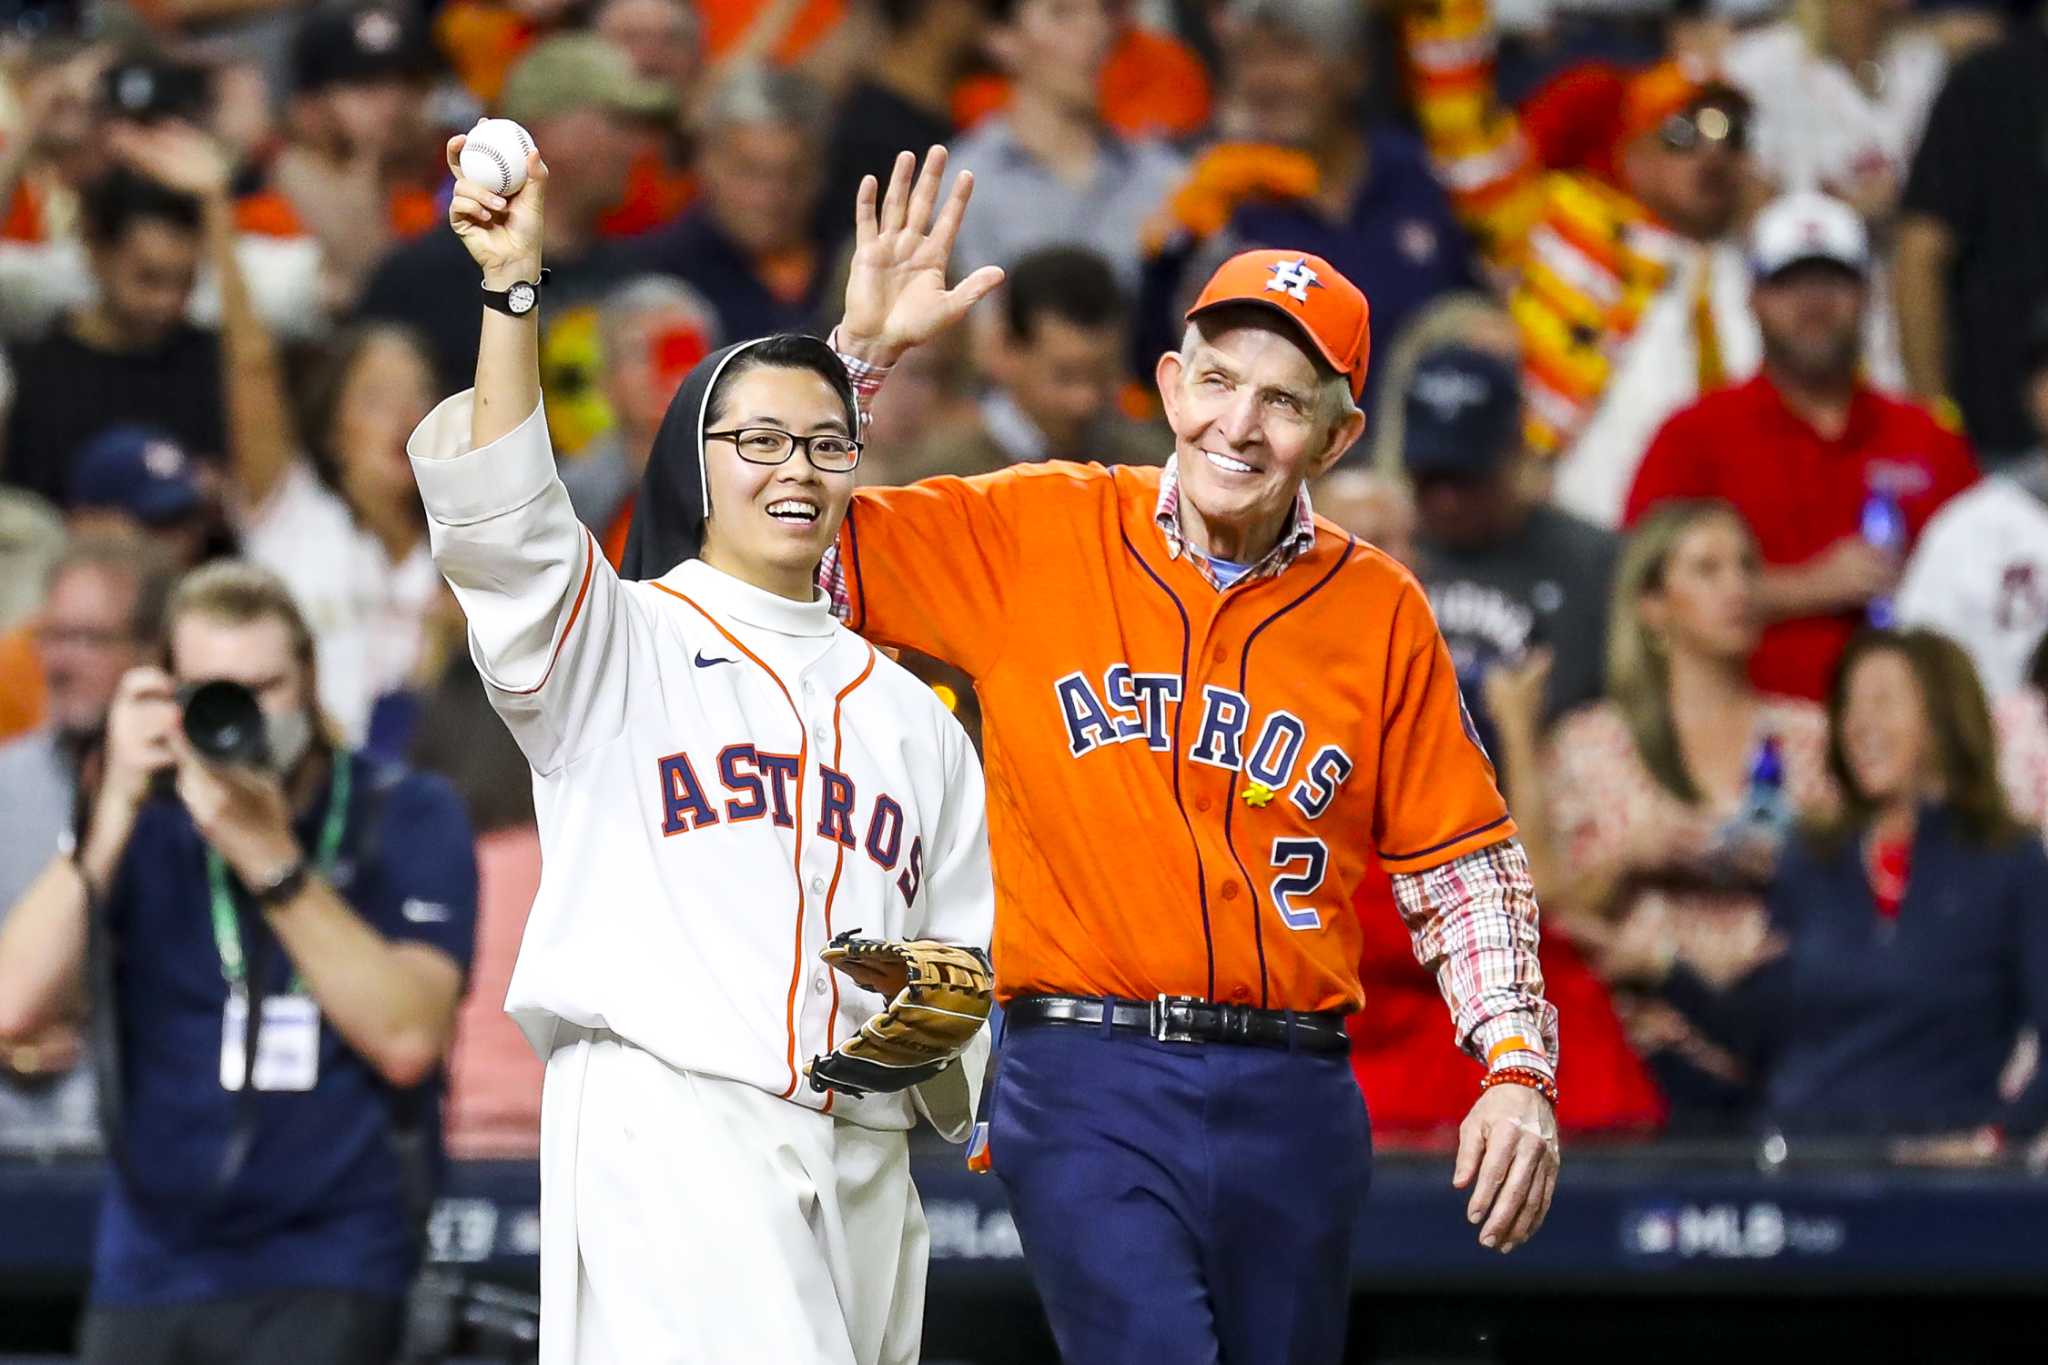 Mattress Mack's Astros first pitch: MLB says it made call to stop it